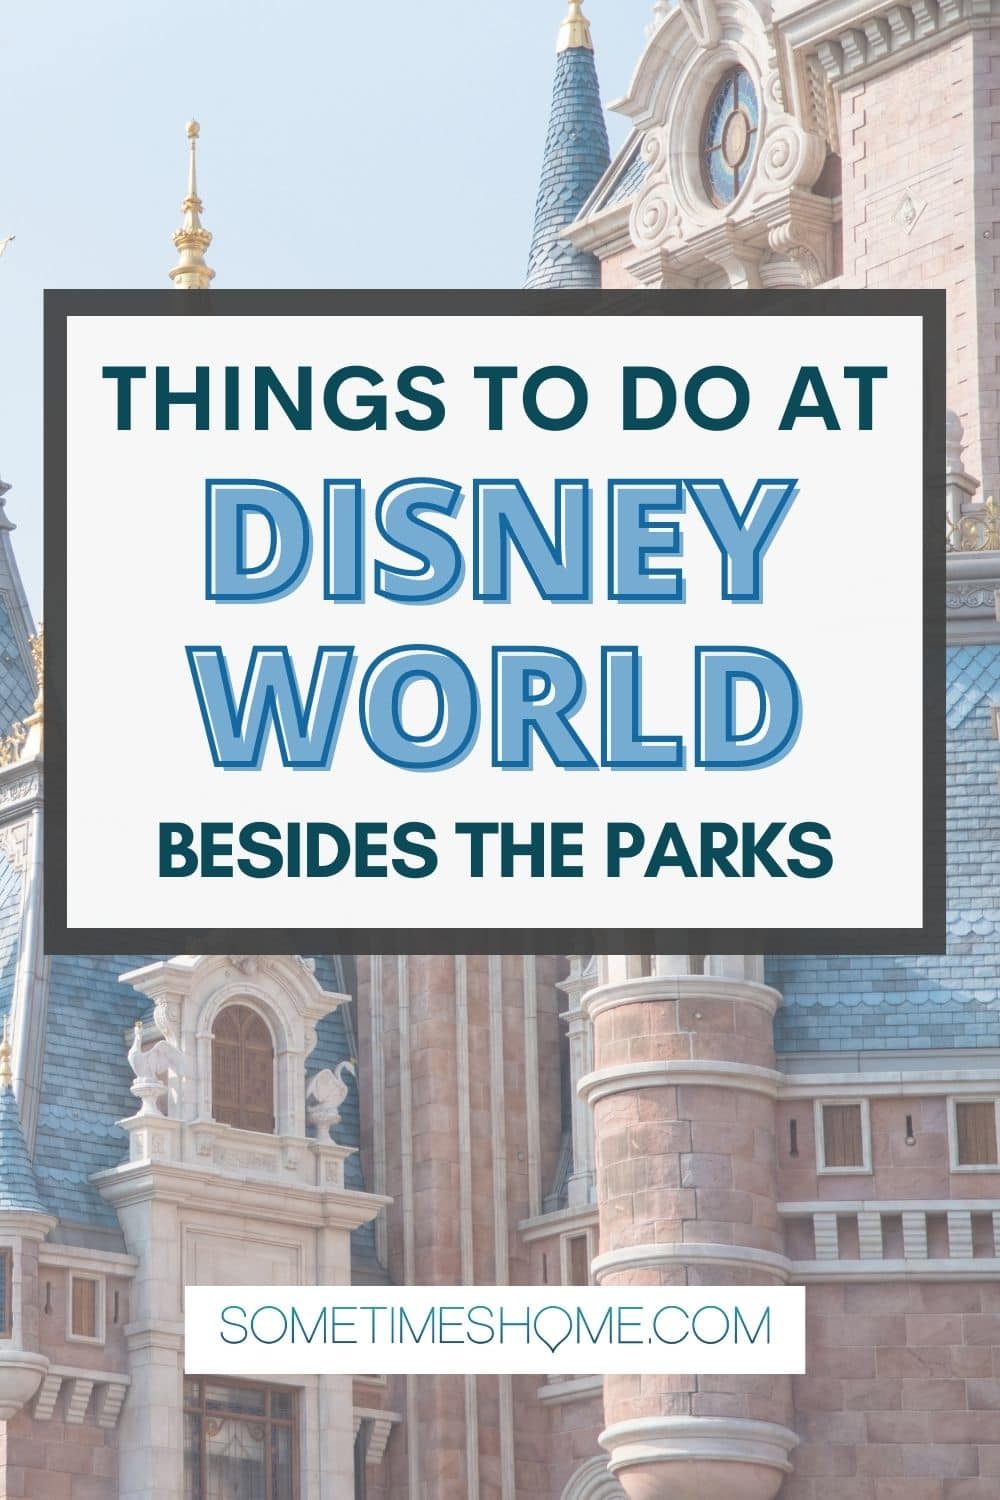 Things to do at Disney World besides the parks with an image of the castle behind it.